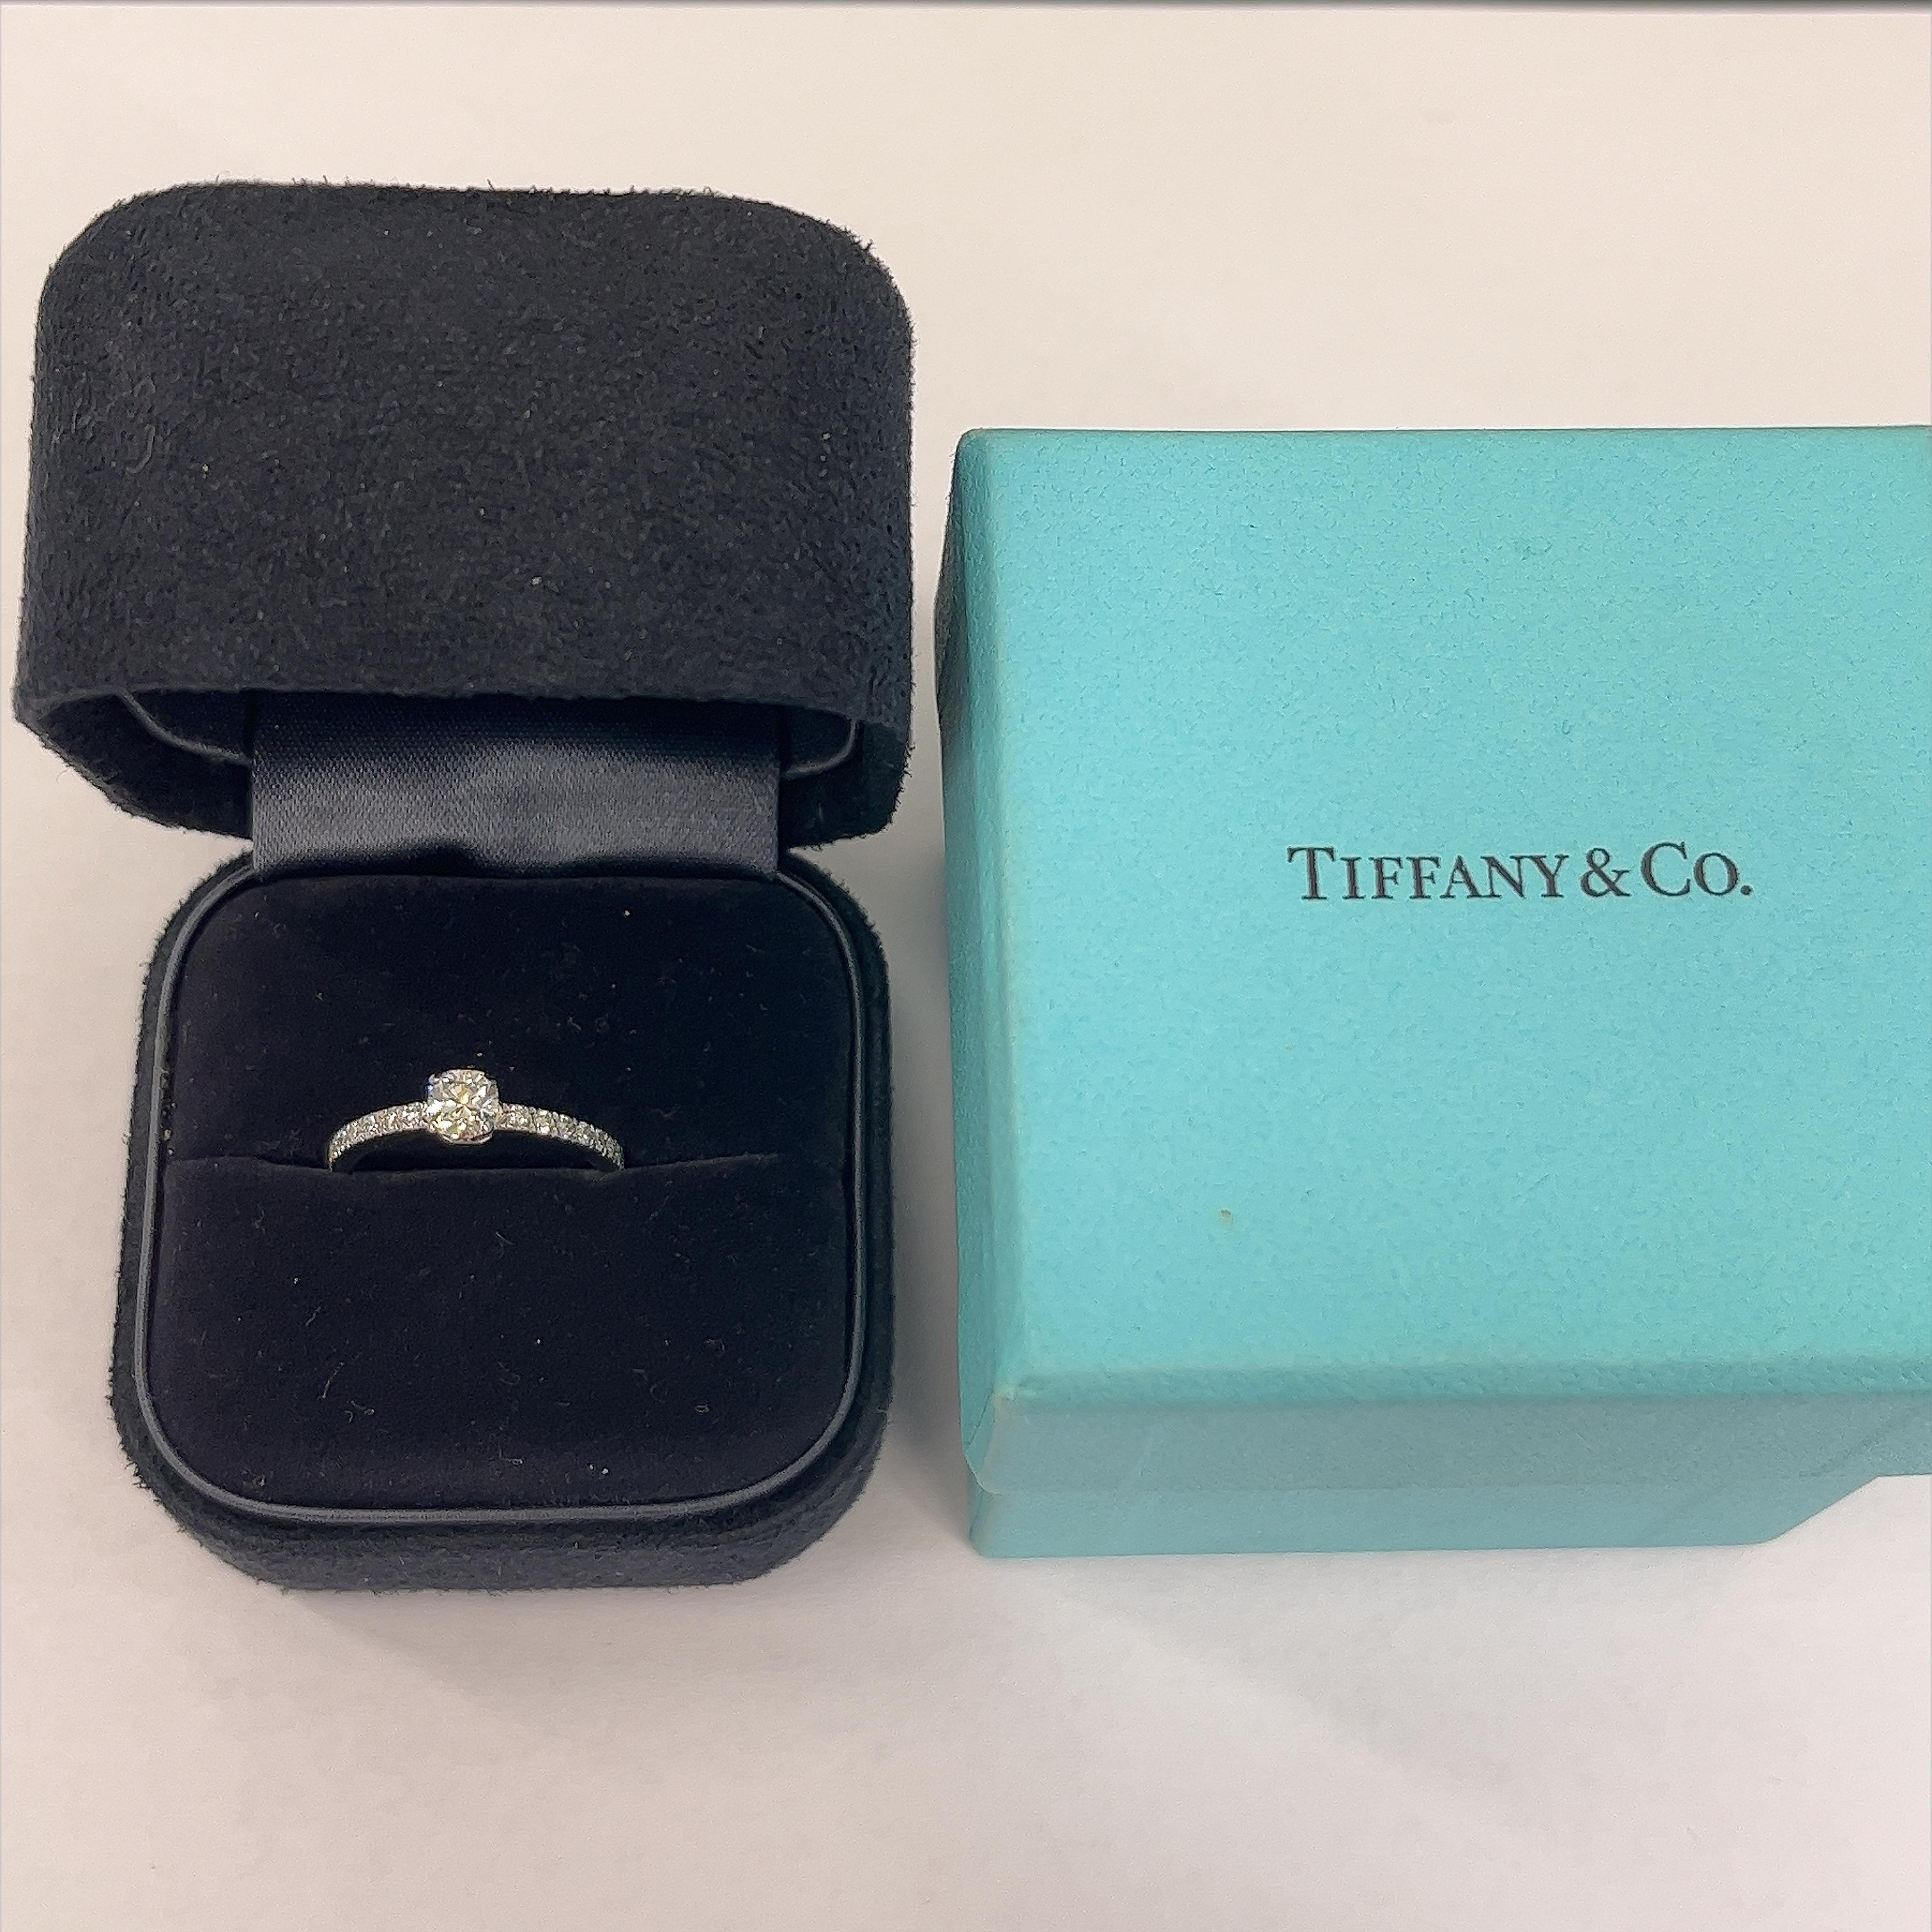 Tiffany & Co 0.33ct Square Cushion Diamond Engagement Ring set in Platinum  In Excellent Condition For Sale In London, GB